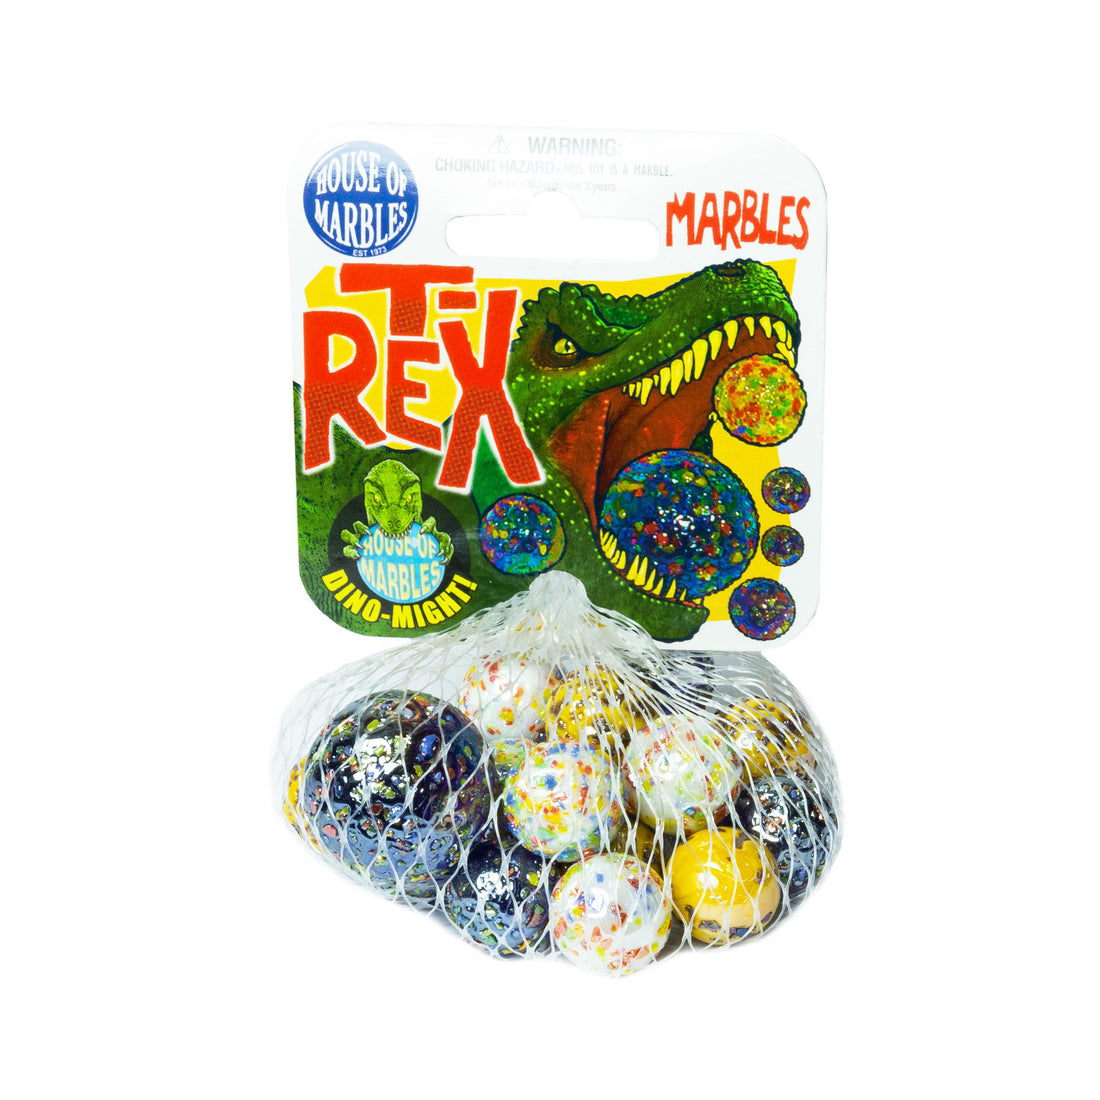 house-of-marbles-t-rex-net-bag-of-marbles-hom-149043